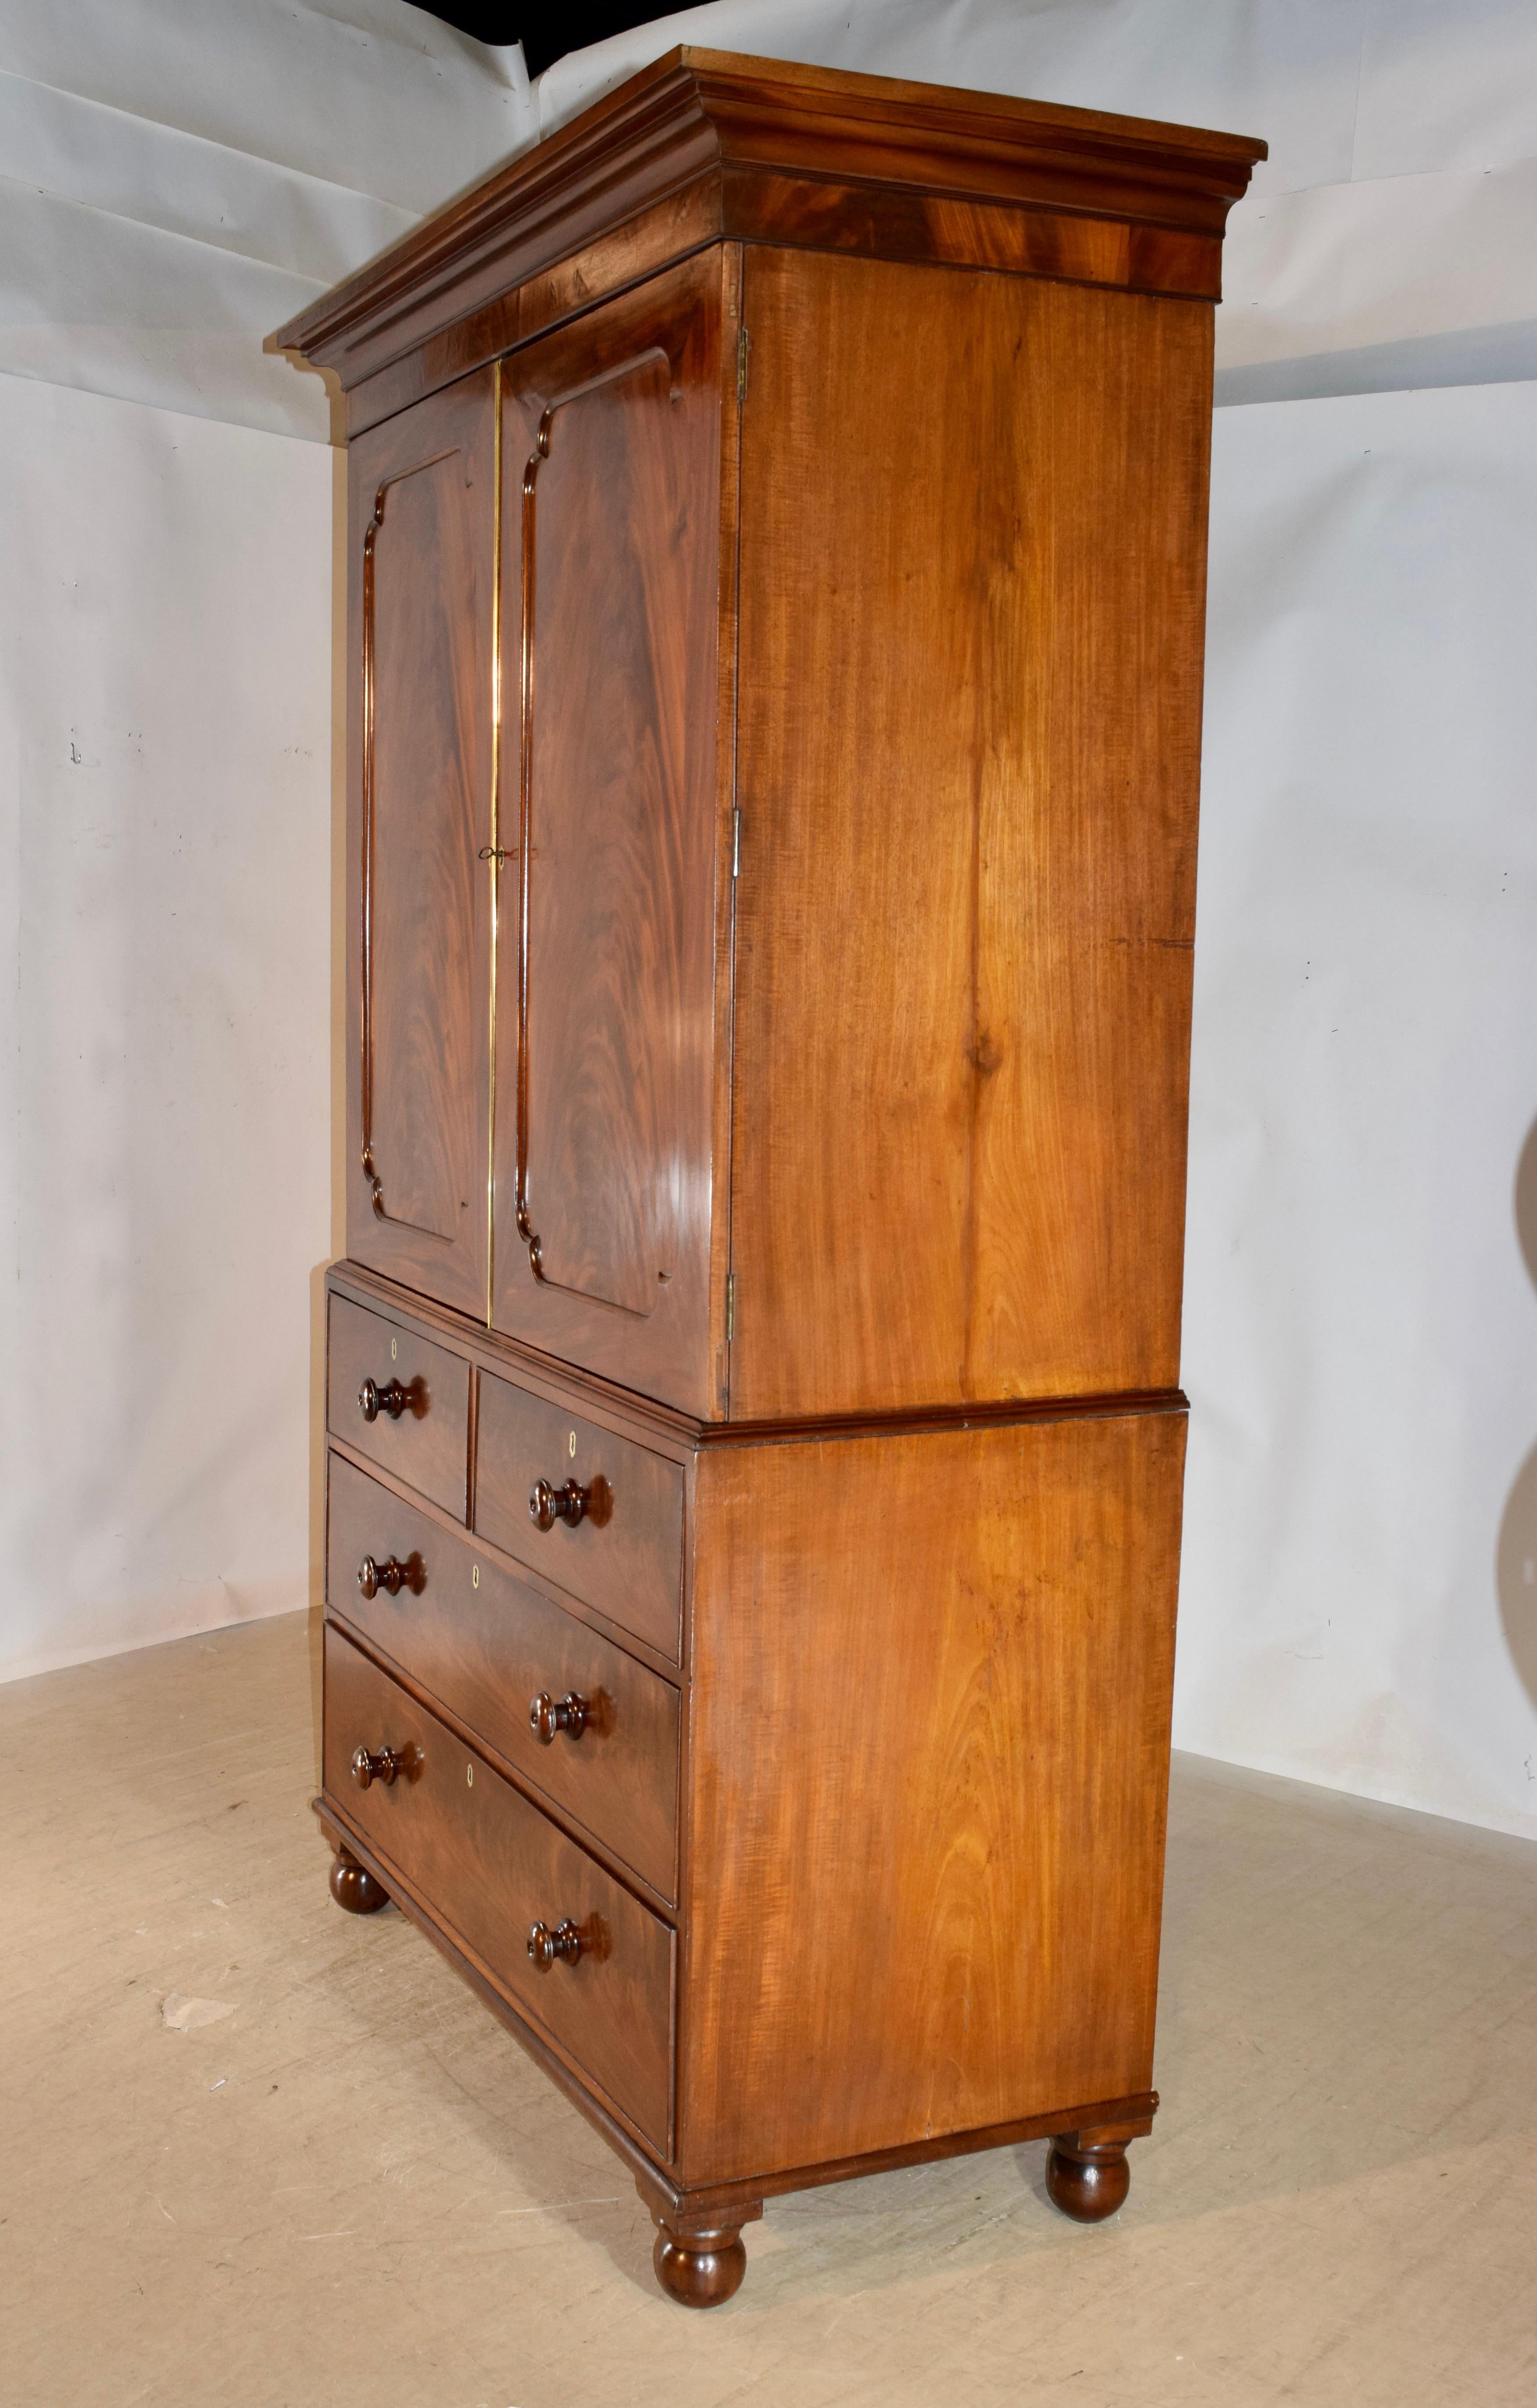 19th century mahogany linen press from England with a lovely crown on top over simple sides and two large paneled doors in the front with magnificent flame graining, which open to reveal the original mahogany slides. The door has brass molding on